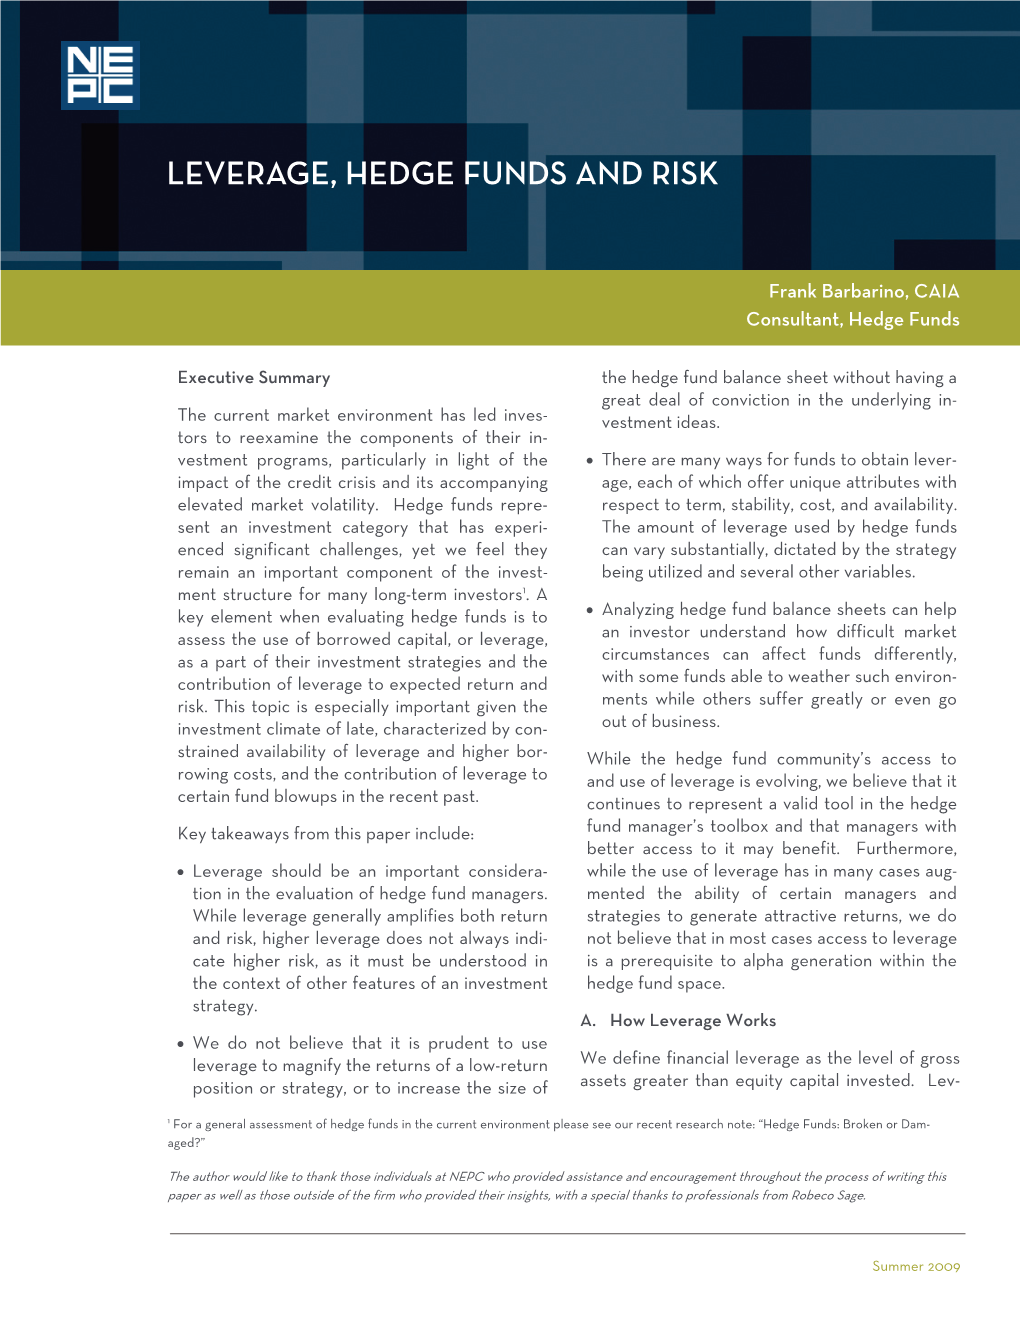 Leverage, Hedge Funds and Risk